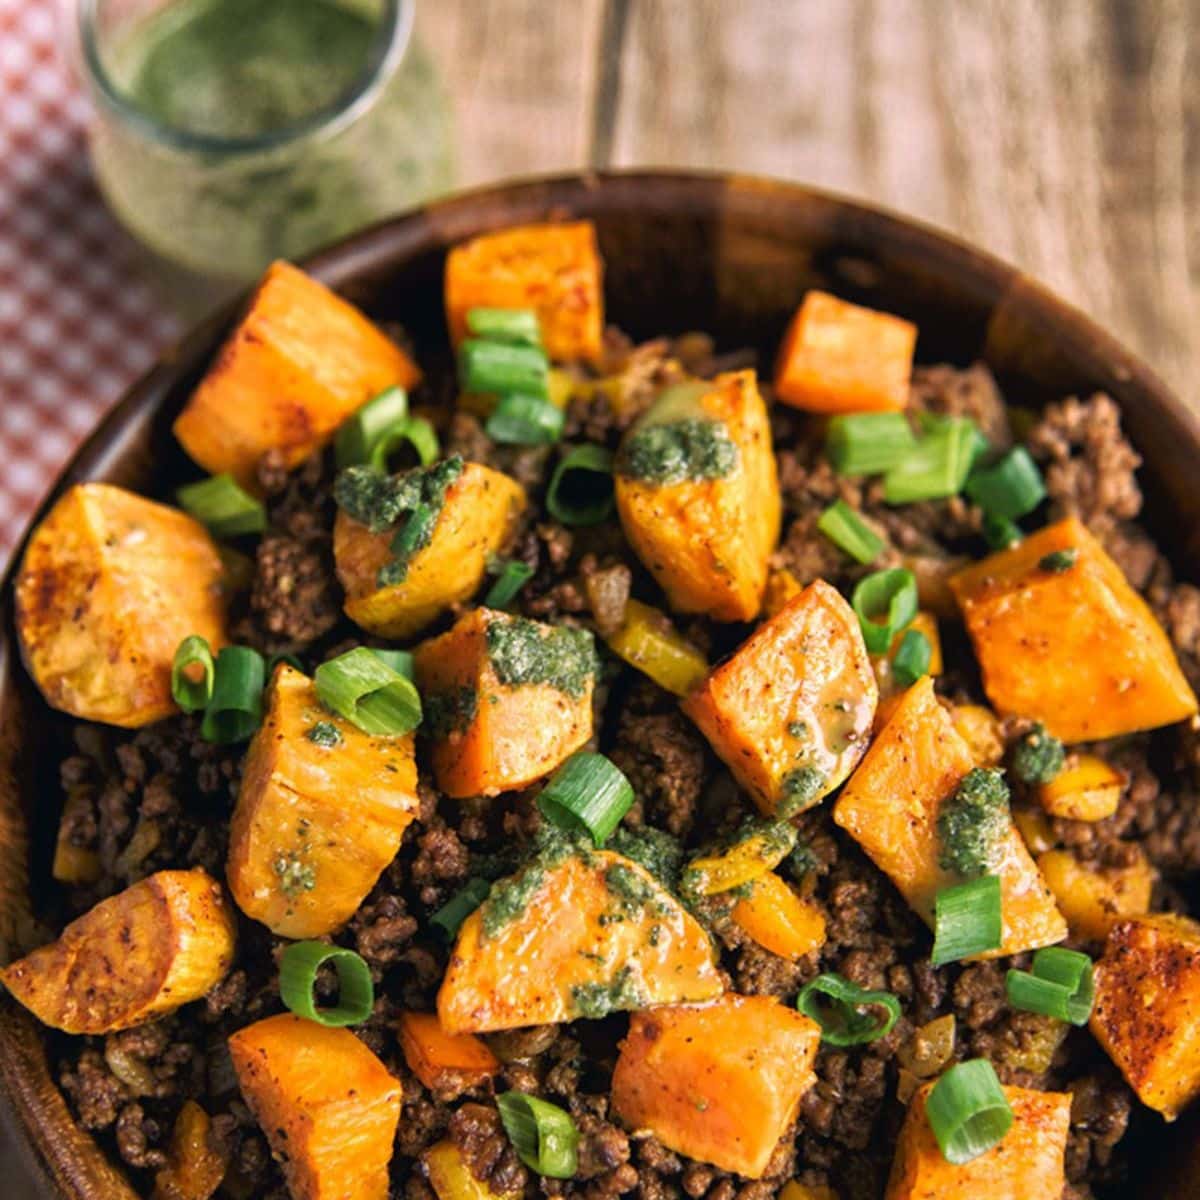 https://paleoleap.com/wp-content/uploads/2017/02/sweet-potato-and-ground-beef-bowl-featured.jpg